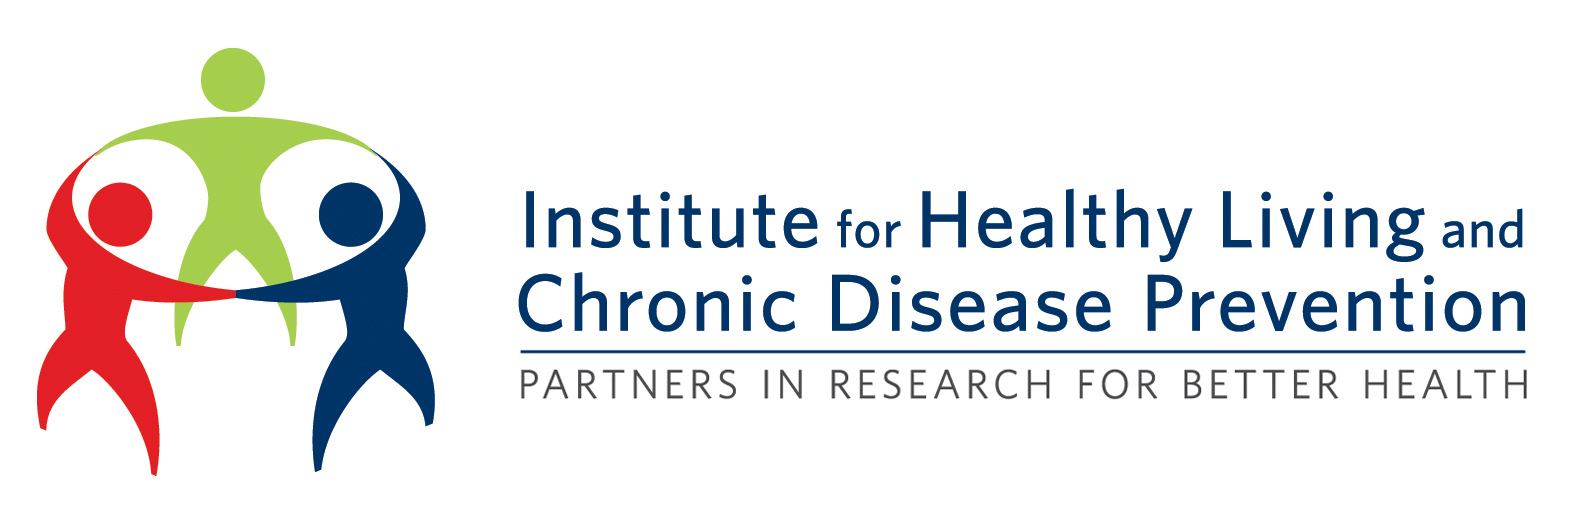 Institute for Healthy Living and Chronic Disease Prevention